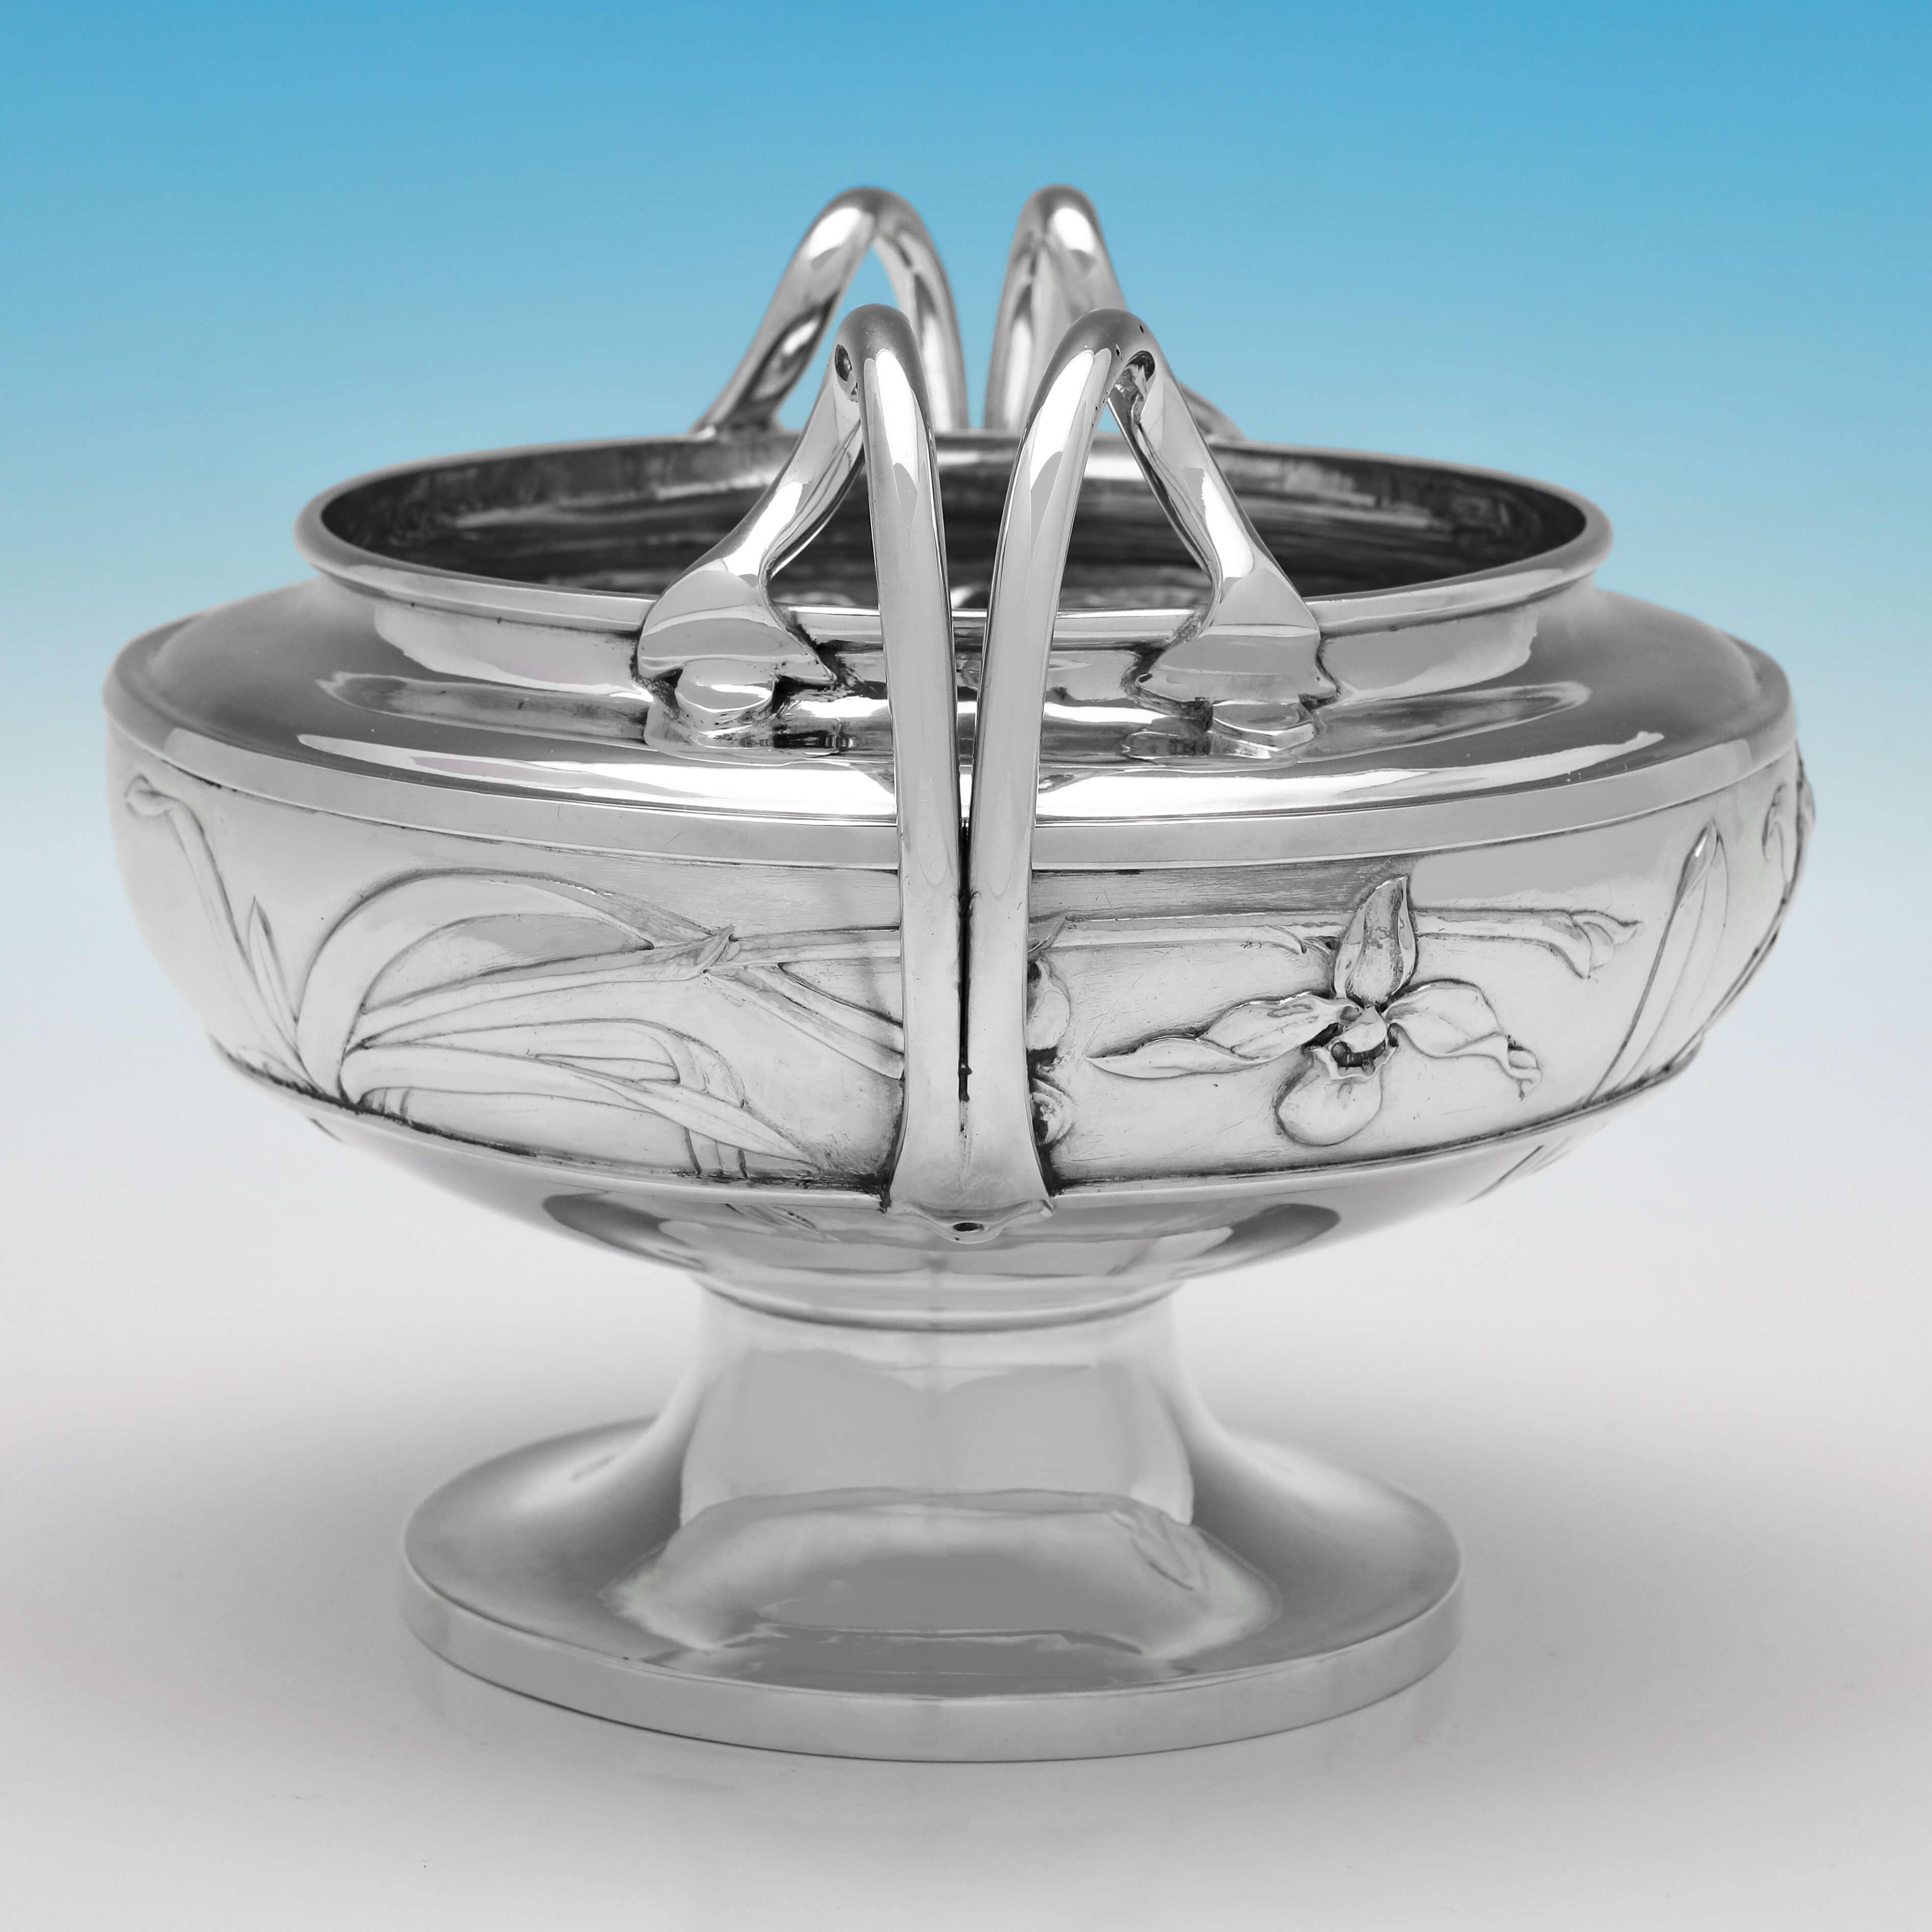 Hallmarked in London in 1907, this attractive, Edwardian, Antique Sterling Silver Bowl, is in the Art Nouveau taste, with chased floral decoration to the body, and loop handles. 

The bowl measures 6.25